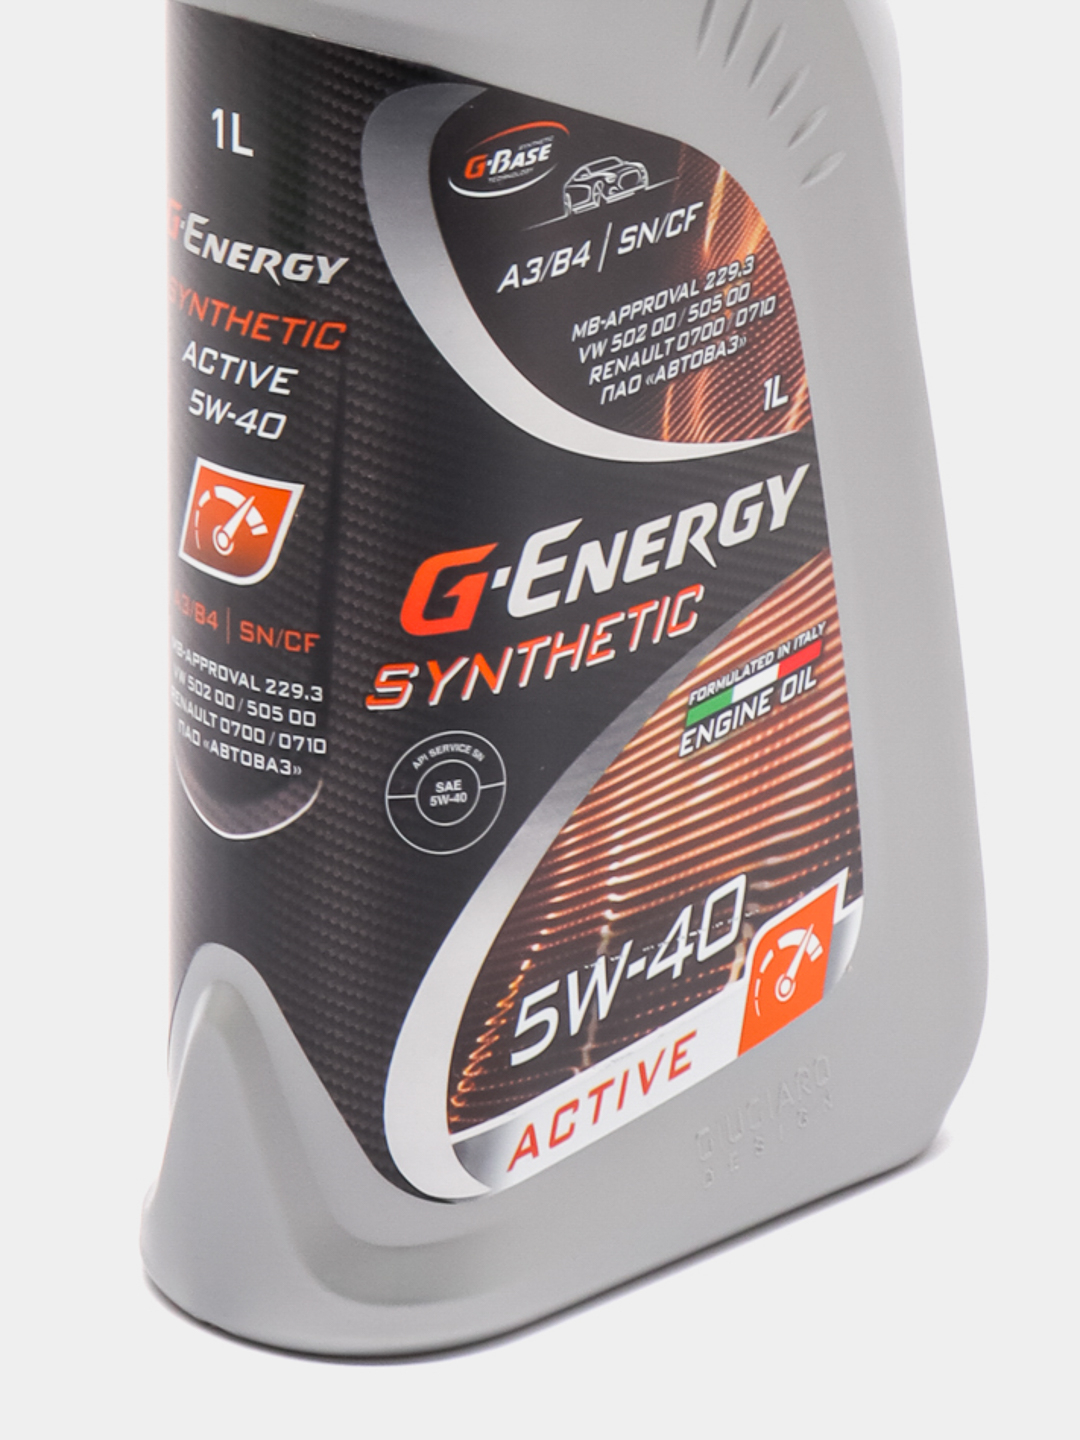 G-Energy Synthetic Active 5w-30. G-Energy Synthetic Active 5w-40. Active 5w40. Джи Энержи Актив 5х30 описание. Energy synthetic active 5w40